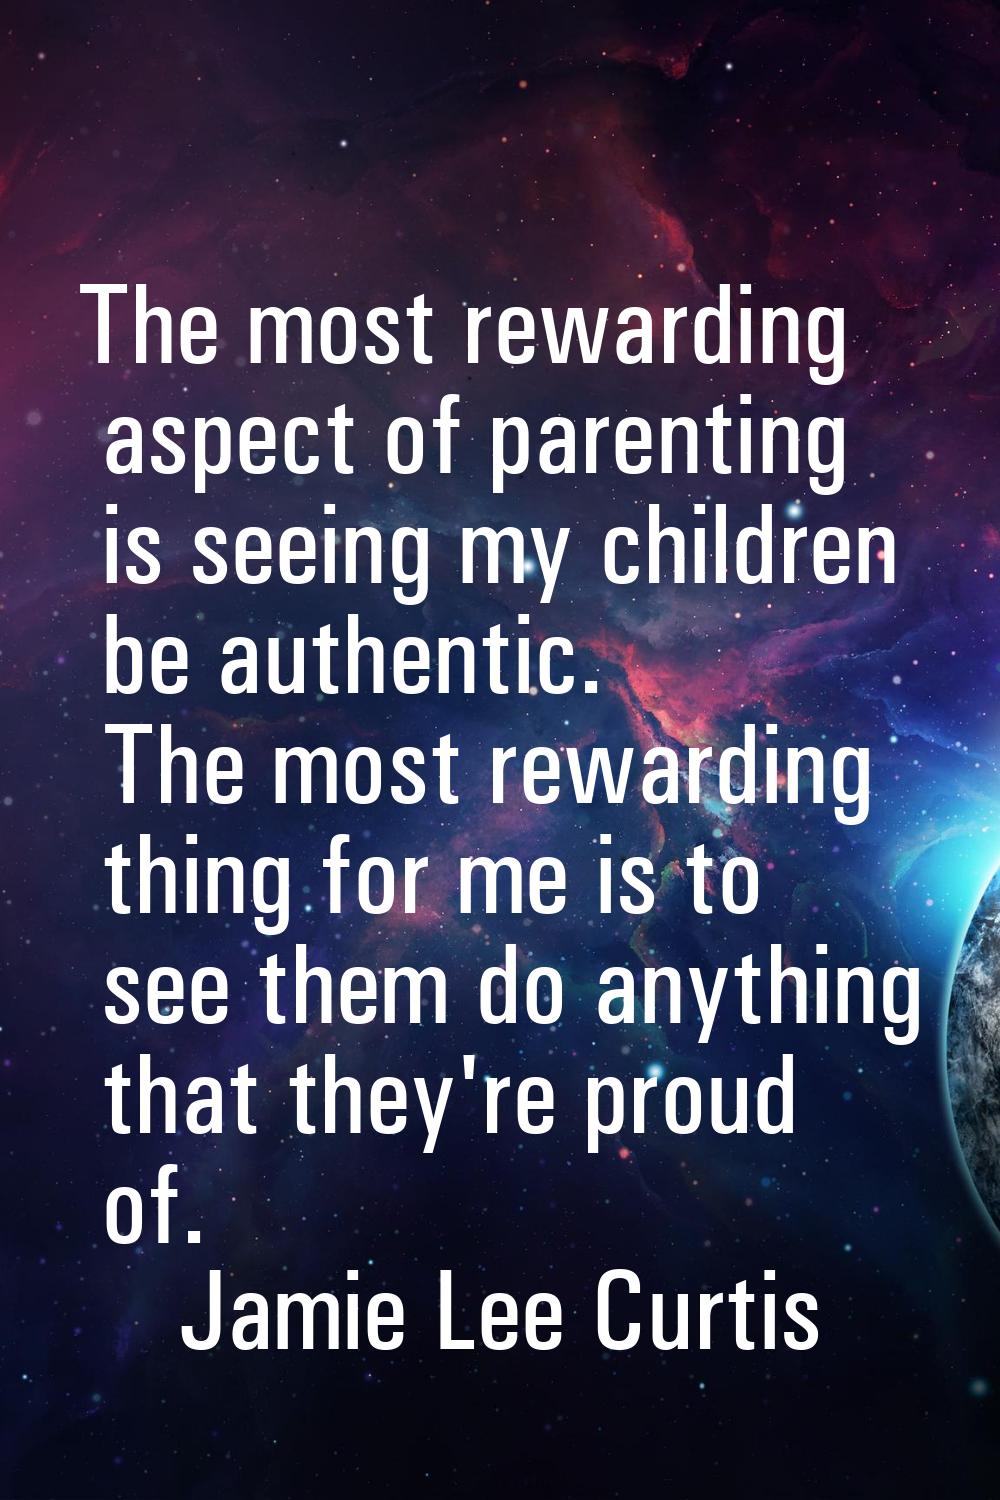 The most rewarding aspect of parenting is seeing my children be authentic. The most rewarding thing